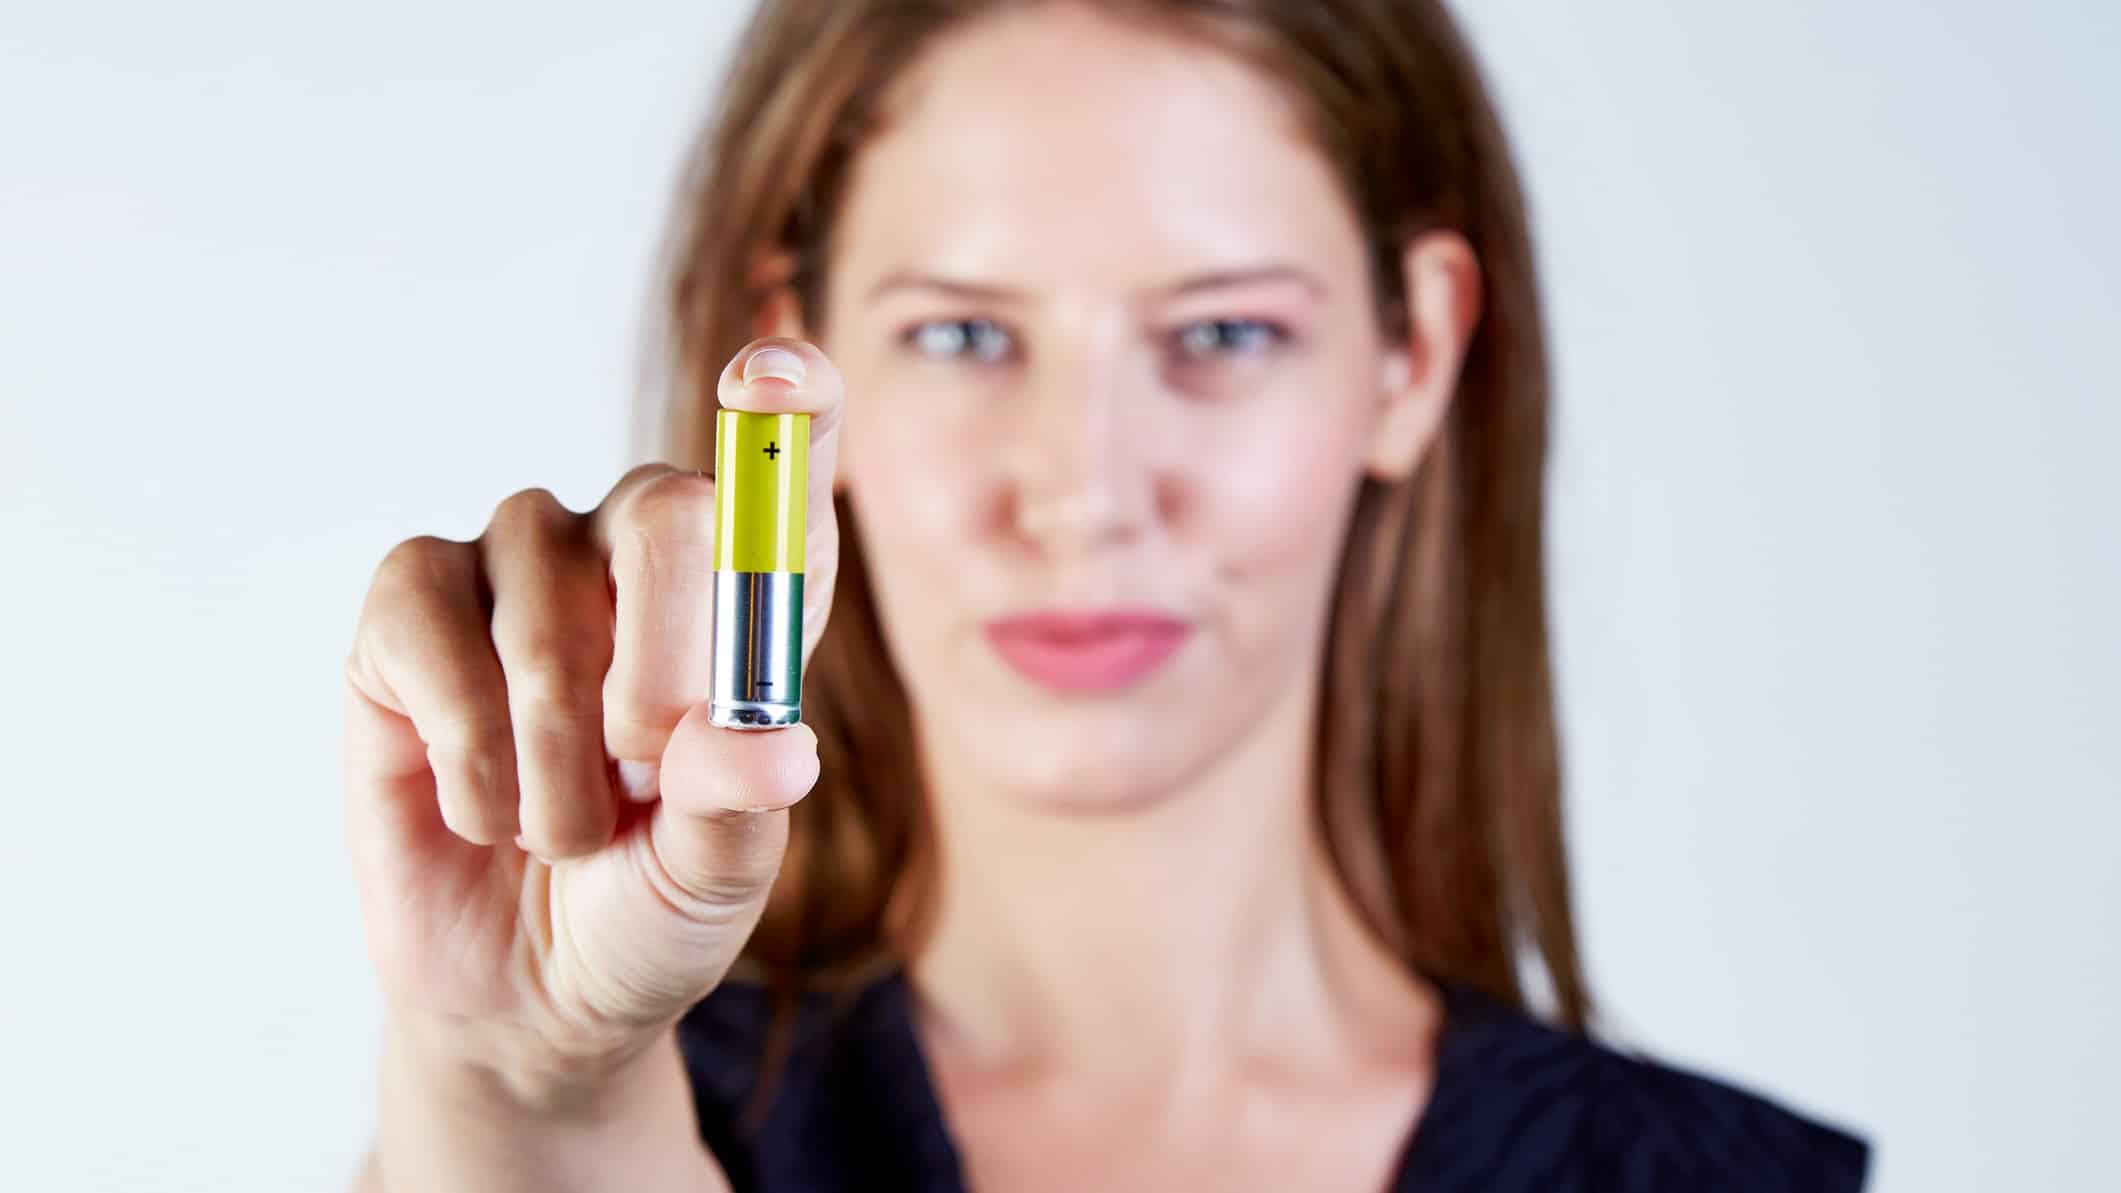 green lithium battery being held by person